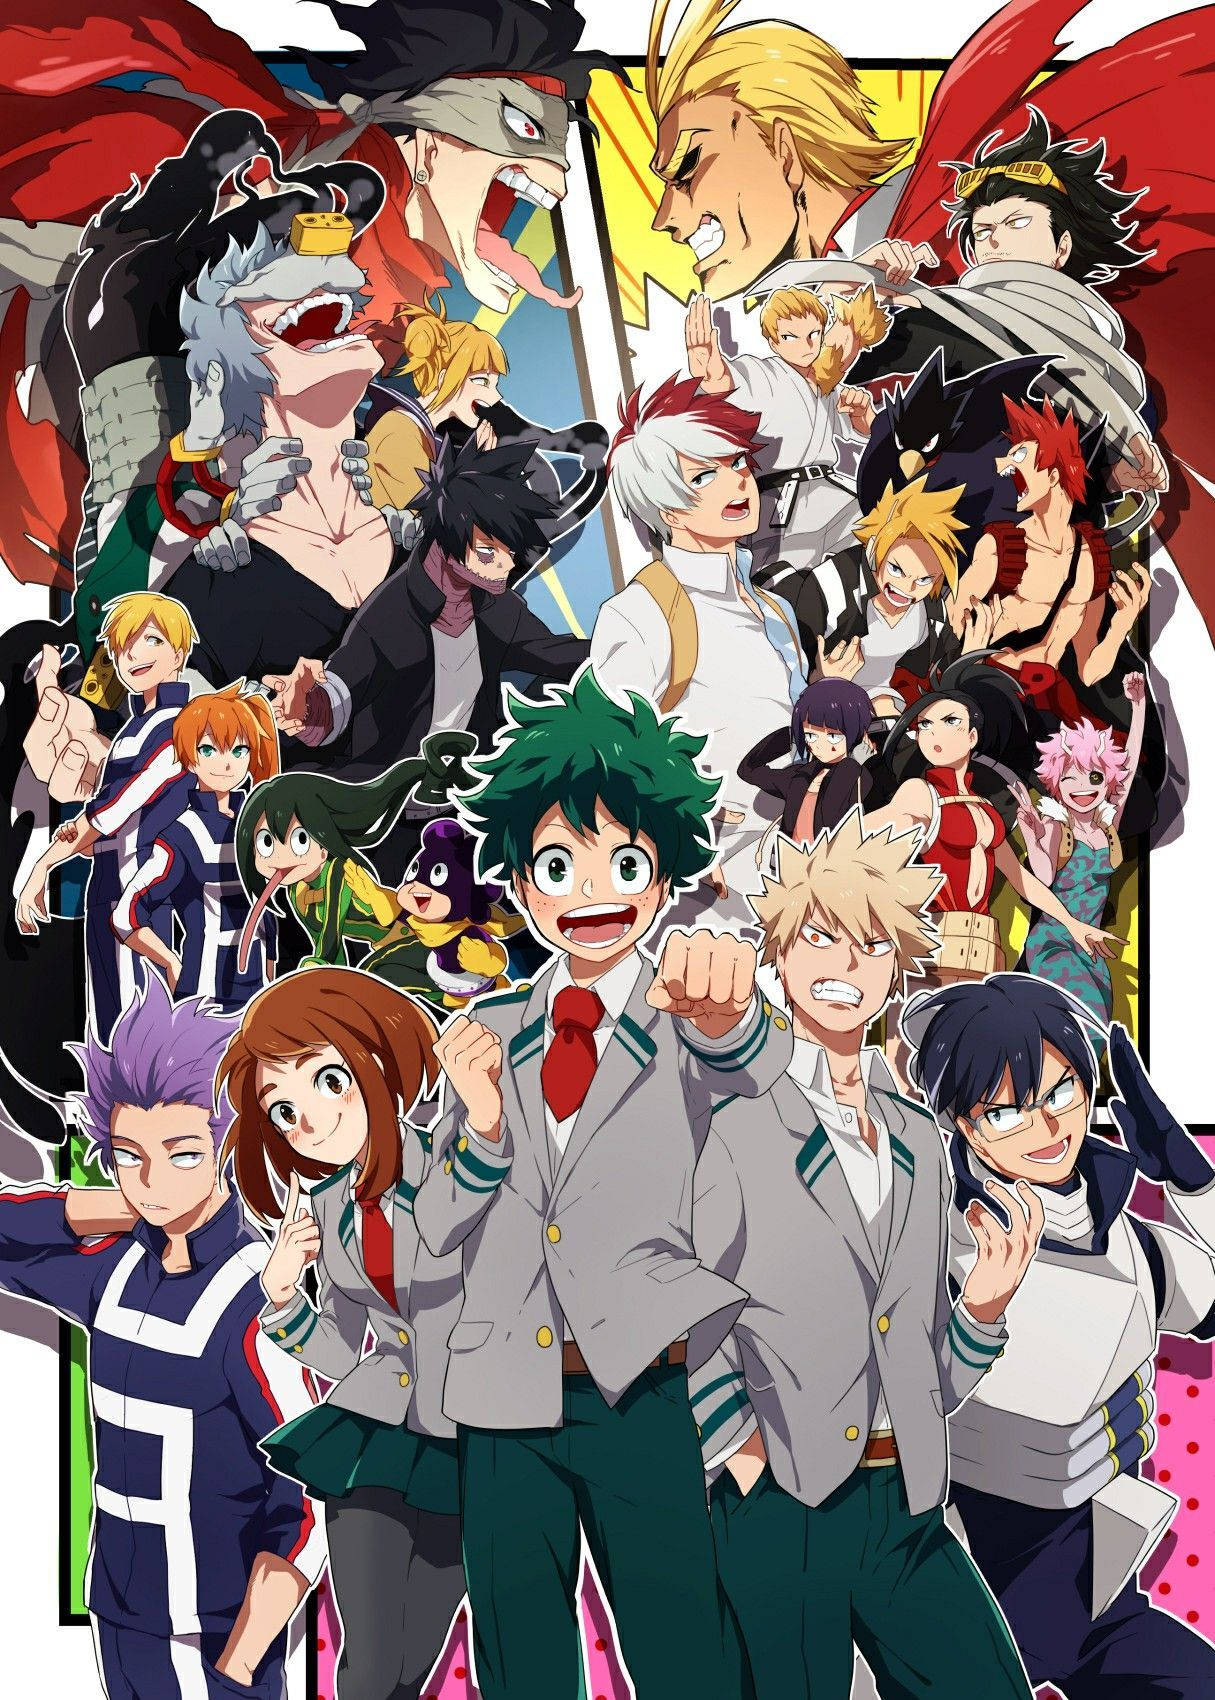 53 My Hero Academia Wallpapers & Backgrounds For FREE